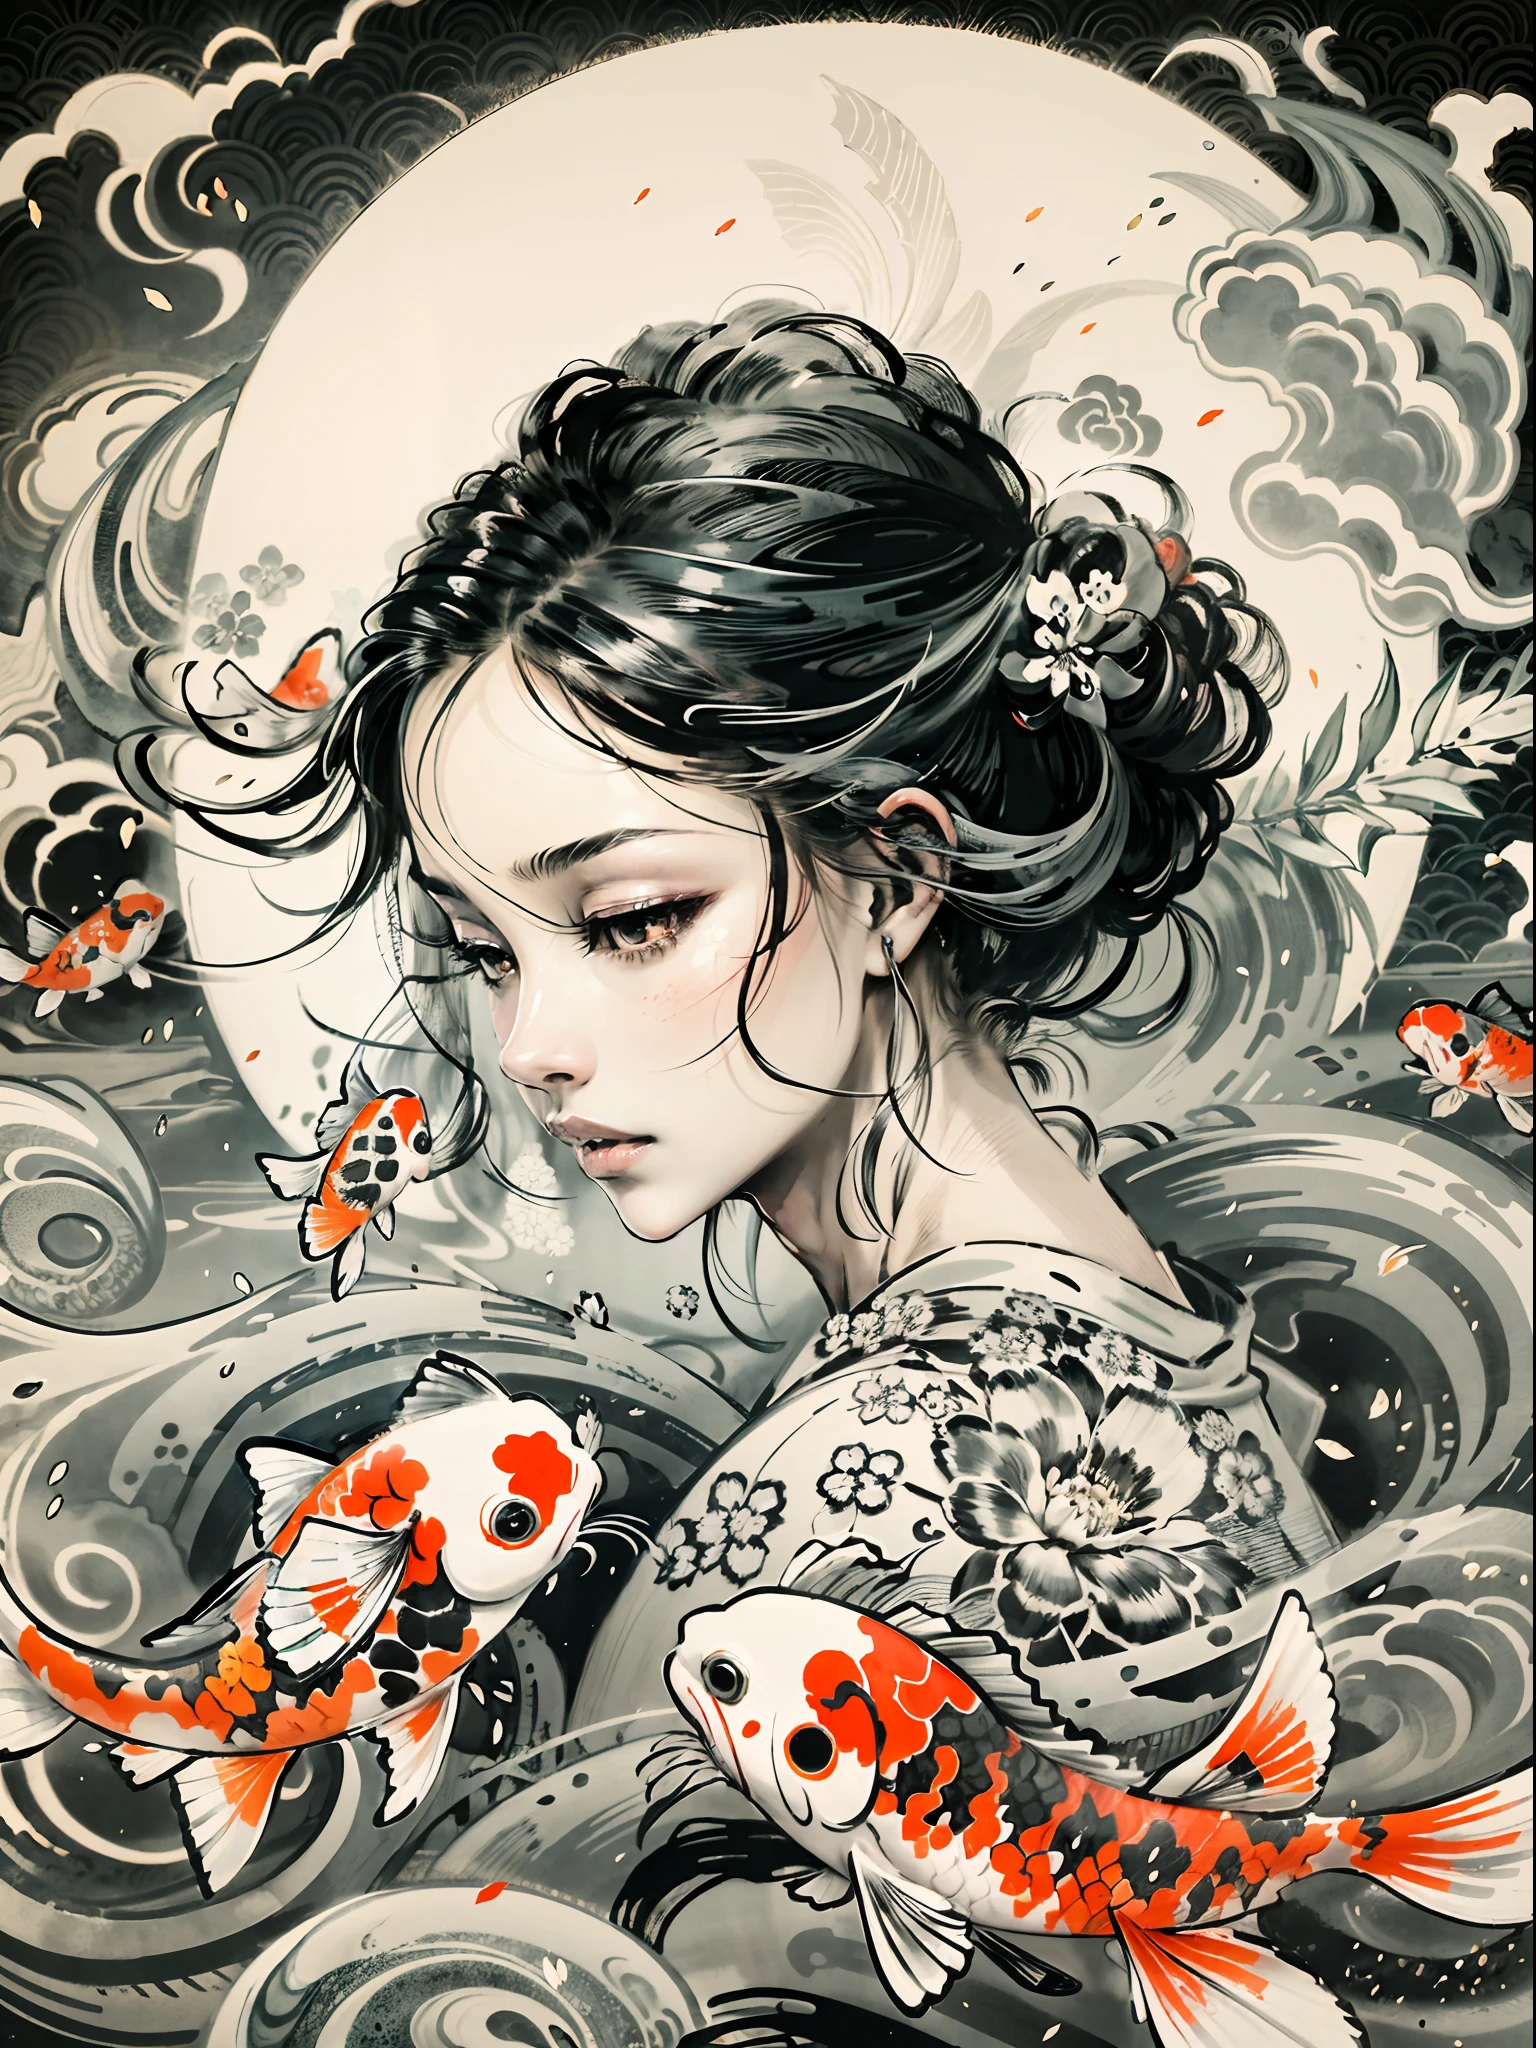 "A mesmerizing depiction of elegant koi fishes gracefully swirling around a young girl, reminiscent of a stunning Japanese black and white ink painting, forming a mesmerizing yin-yang symbol in the background."